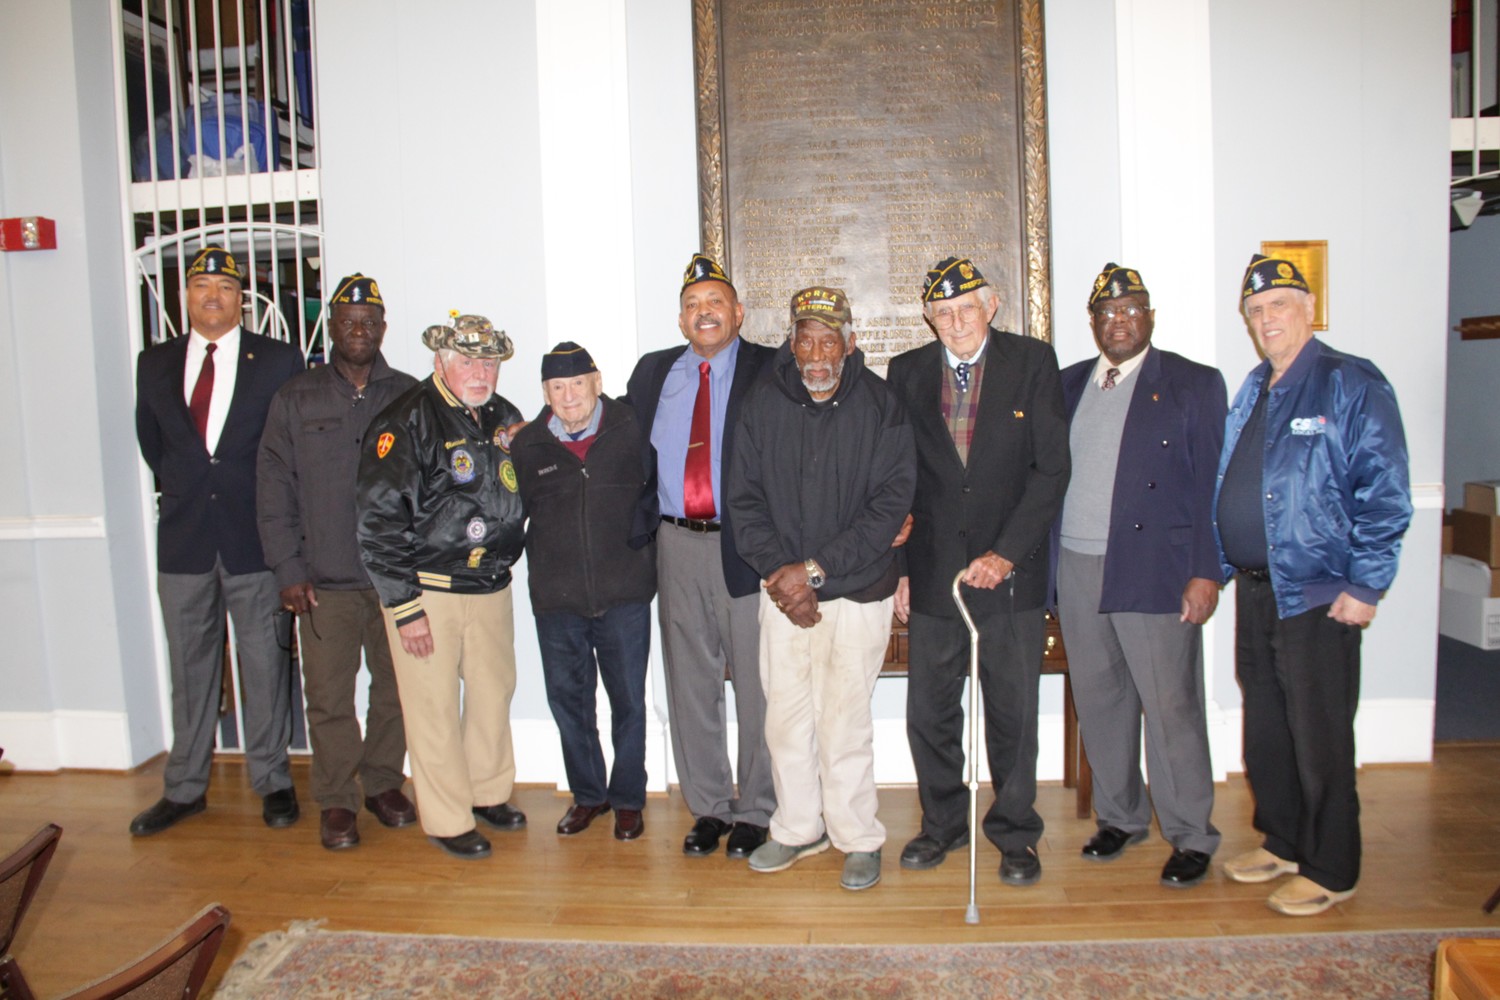 American Legion William Clinton Story Post 342 members after the Pearl Harbor Observance and Memorial Ceremony. From left were 3rd Vice Cmdr. David Jones, Treasurer Calvin Andrew, Vincent Mientes, Cmdr. Coy Richardson, Moses Isaacs, Past Cmdr. Paul Nehrich and 1st Vice Cmdr. David Cockerel.